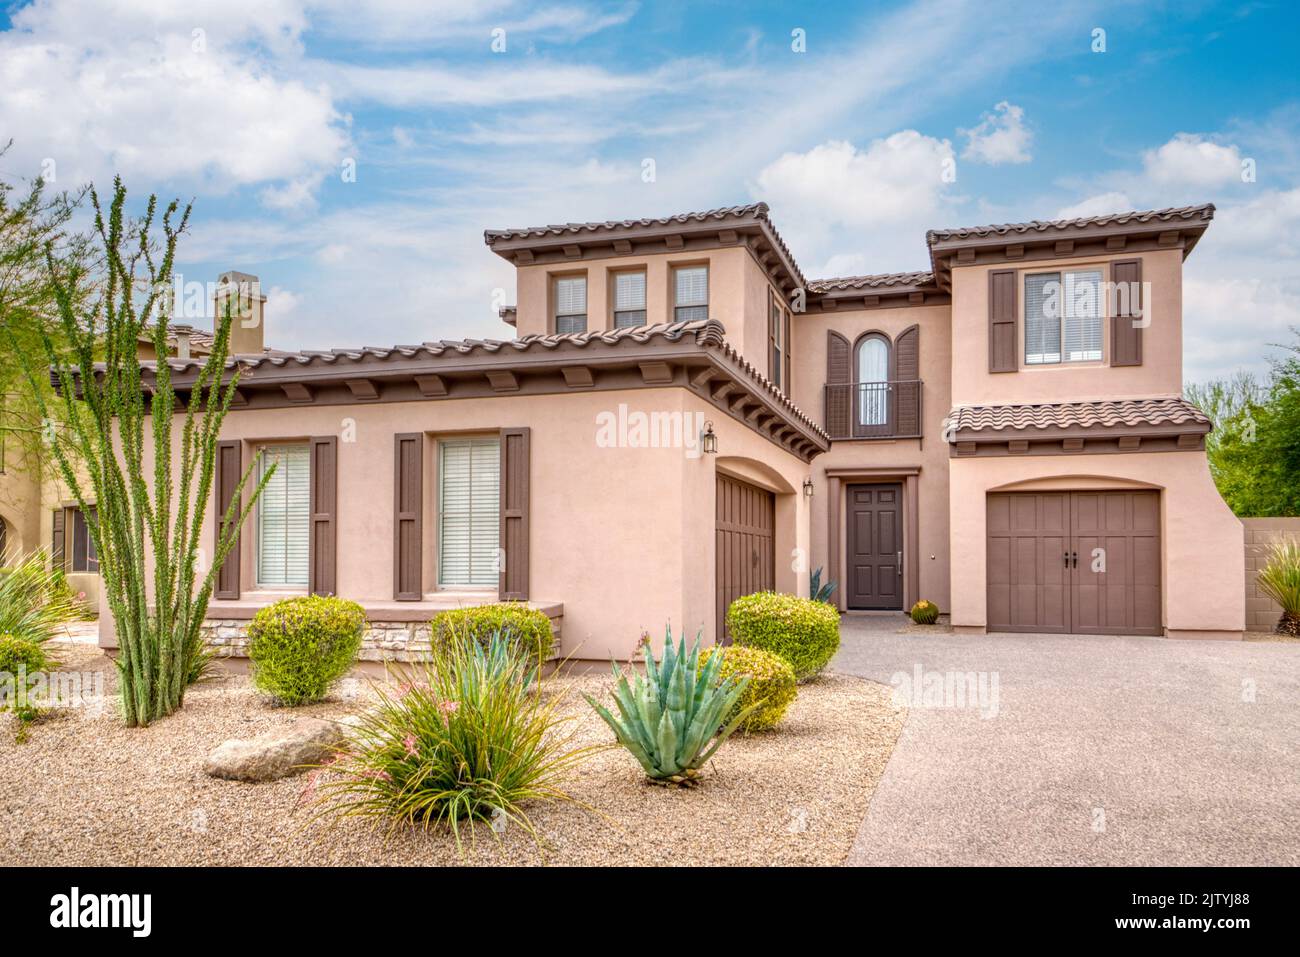 A luxury home in scottsdale Stock Photo